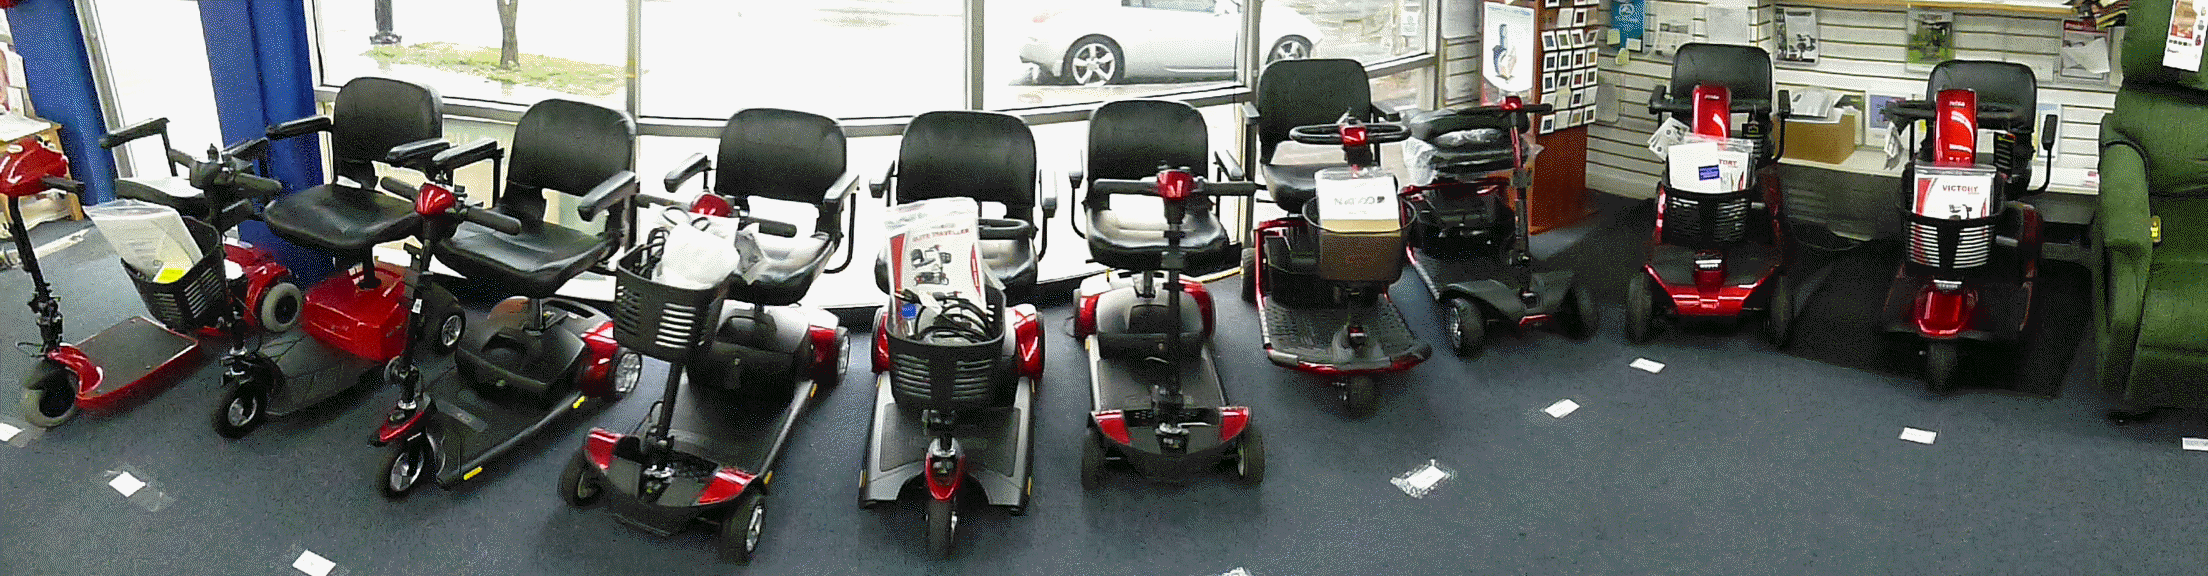 scooter store